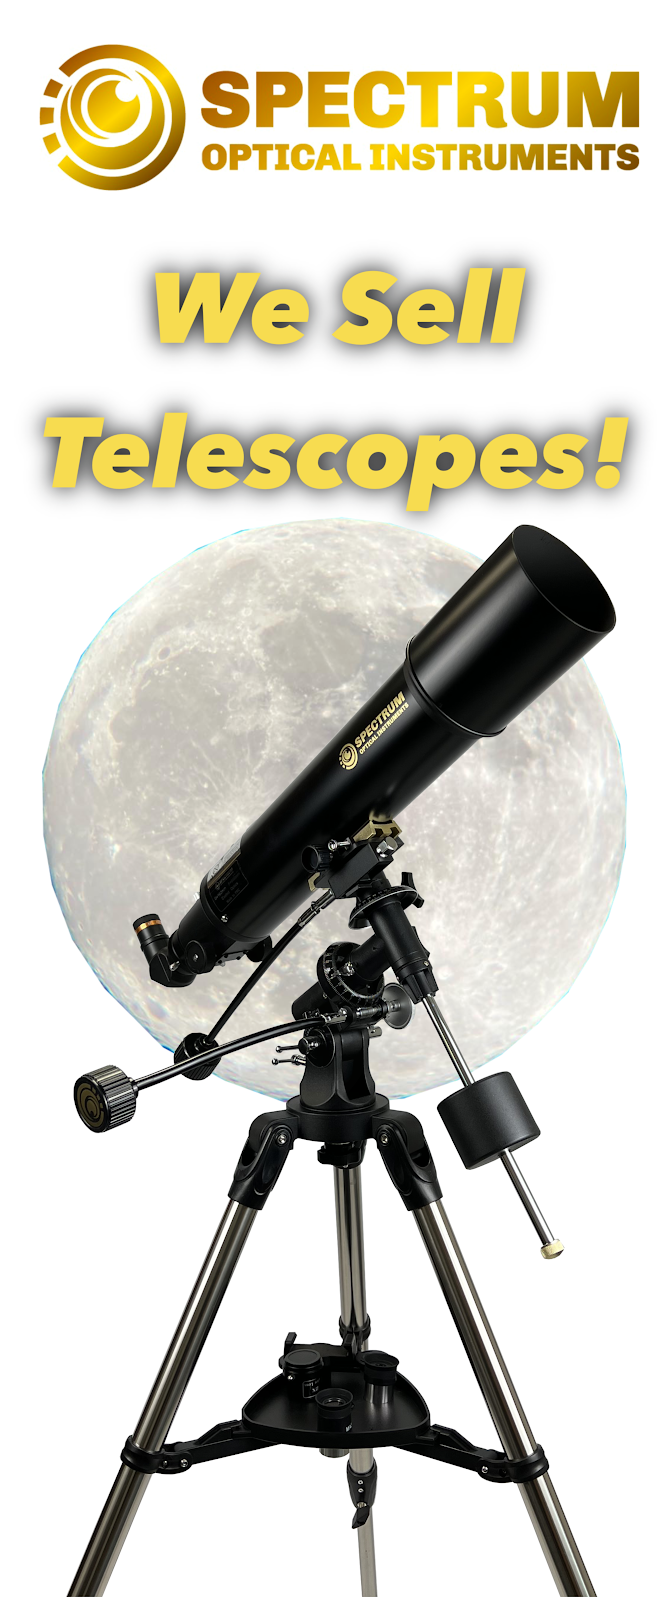 Spectrum Optical Instruments | 20914 Bake Pkwy suite 108, Lake Forest, CA 92630 | Phone: (657) 532-8308